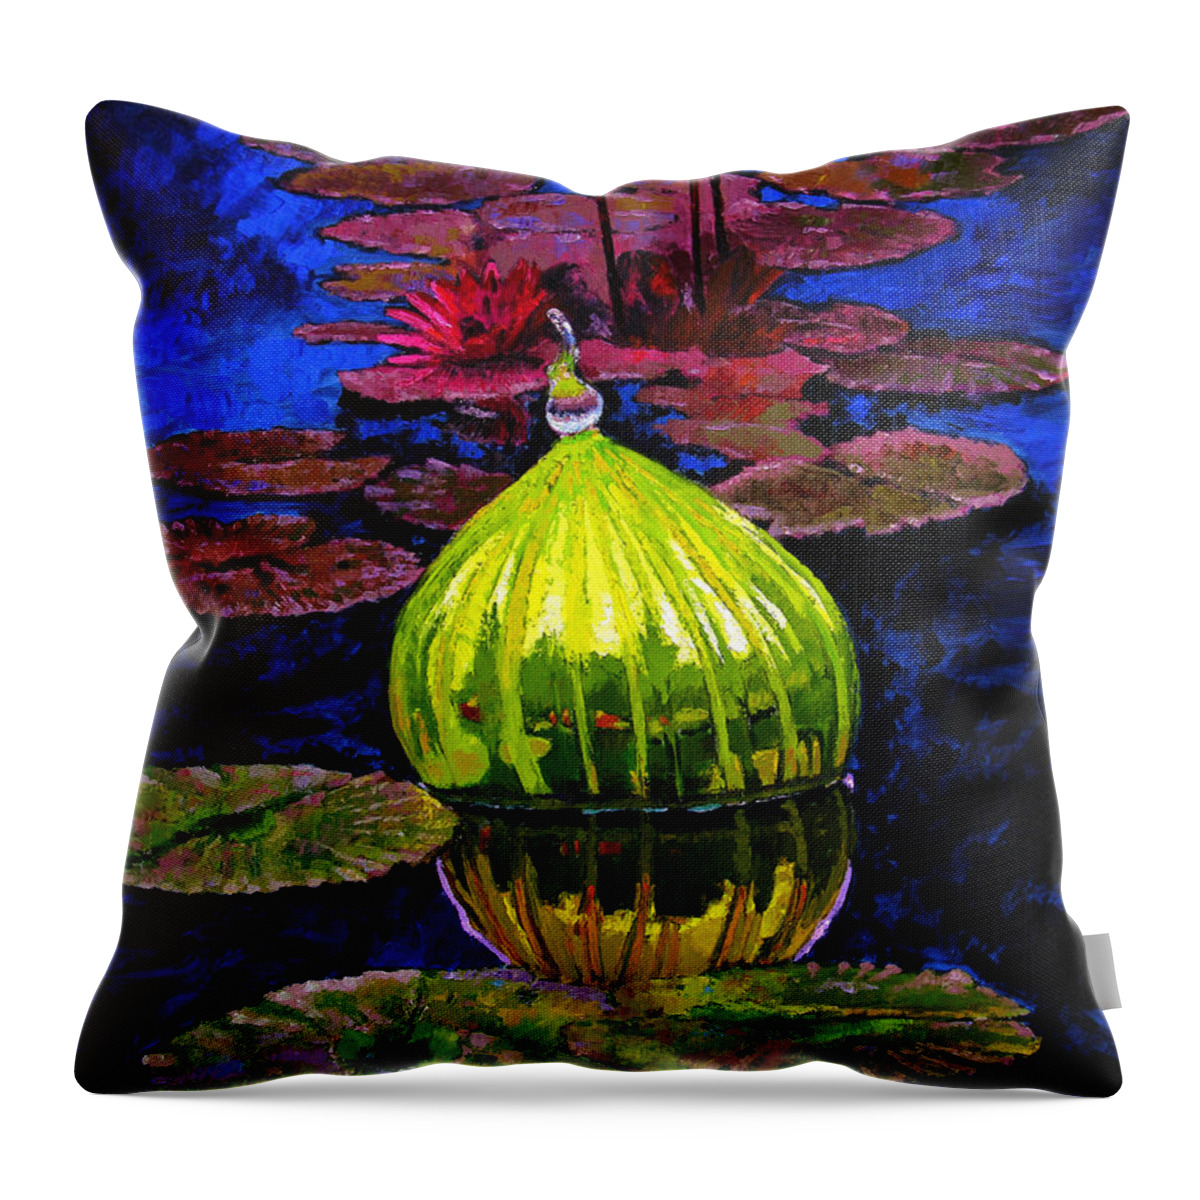 Blown Glass Throw Pillow featuring the painting Lilies and Glass Reflections by John Lautermilch